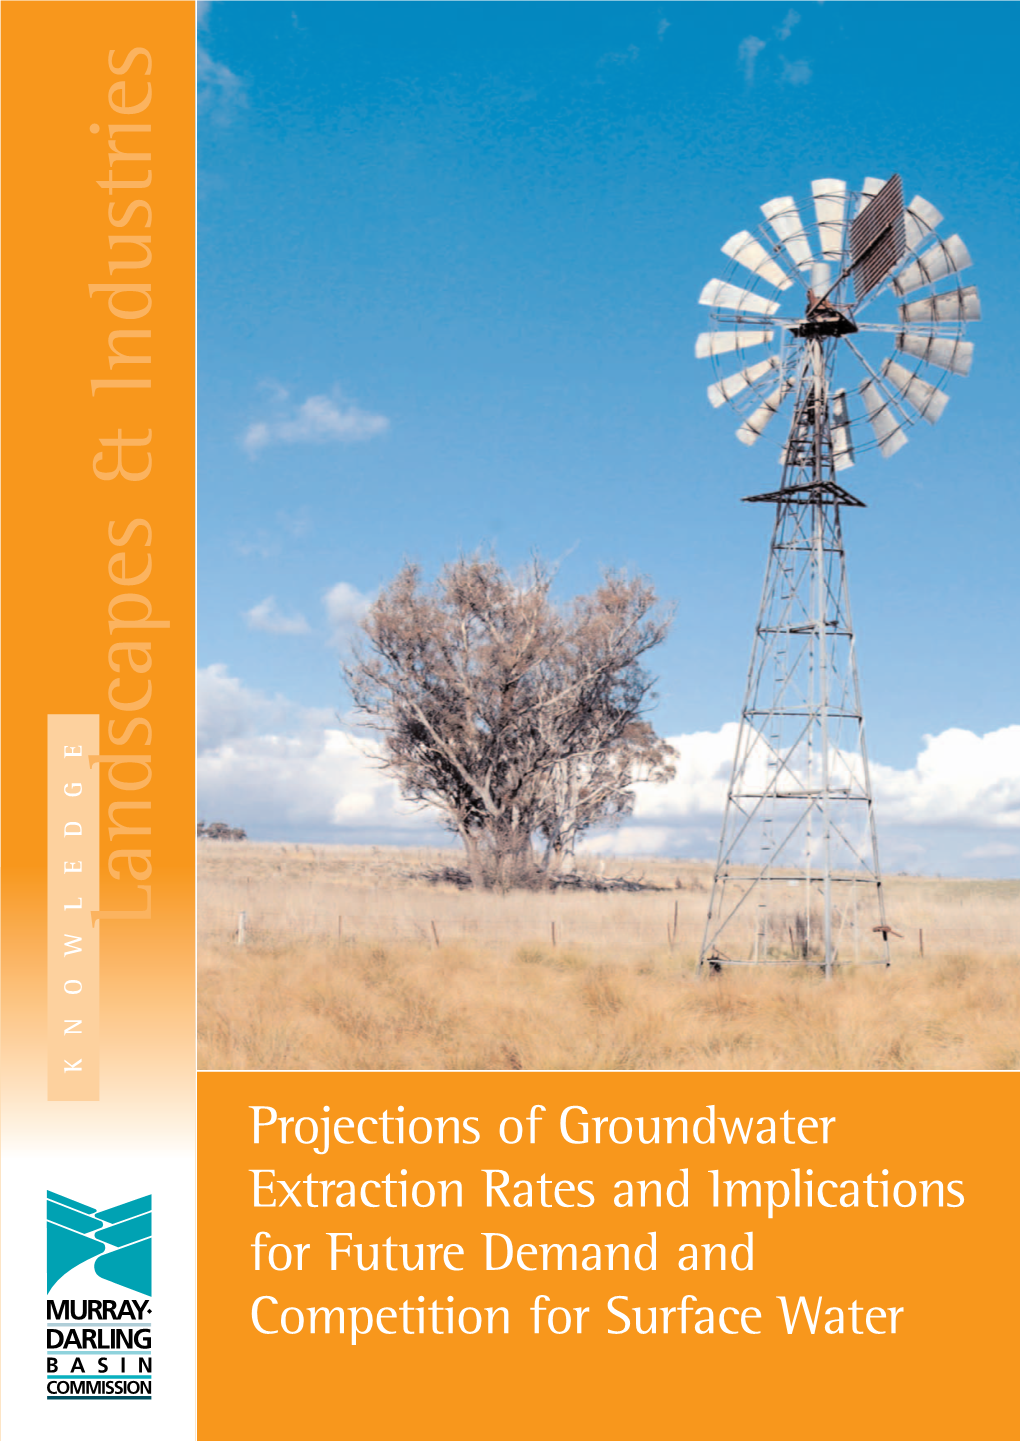 Projections of Groundwater Extraction Rates and Implications for Future Demand and Competition for Surface Water